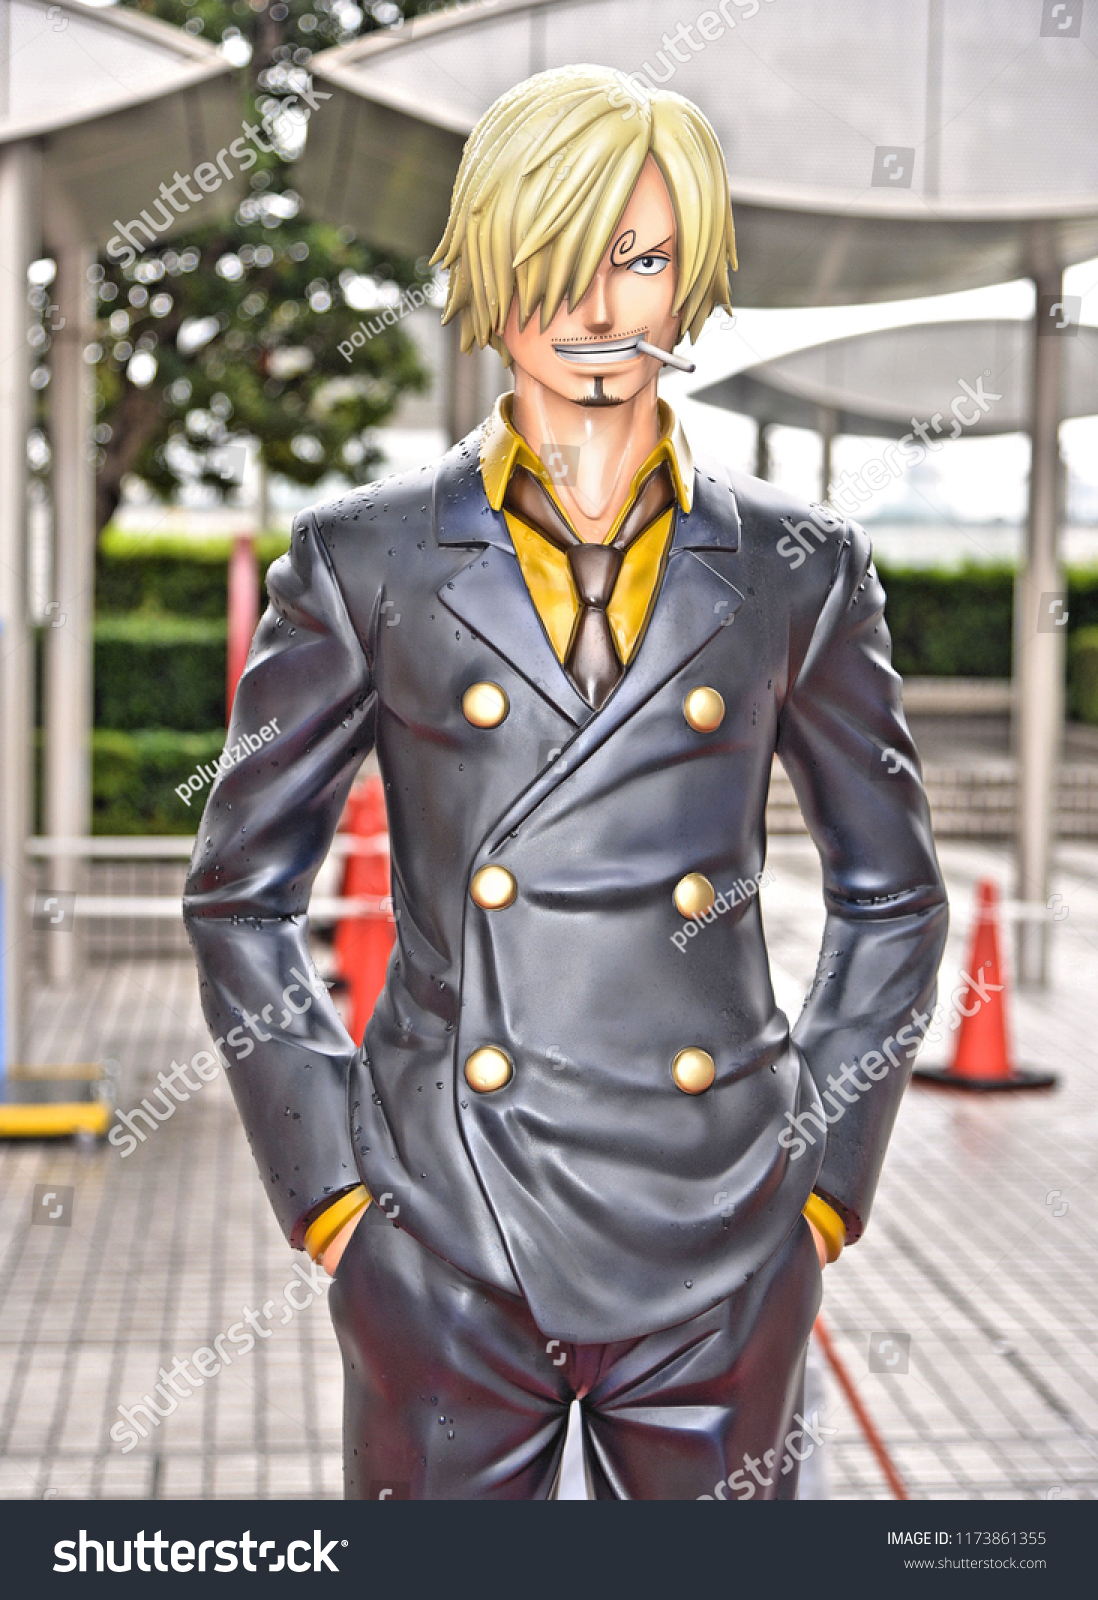 Big Sculpture Model Anime Character Stock Photo Edit Now